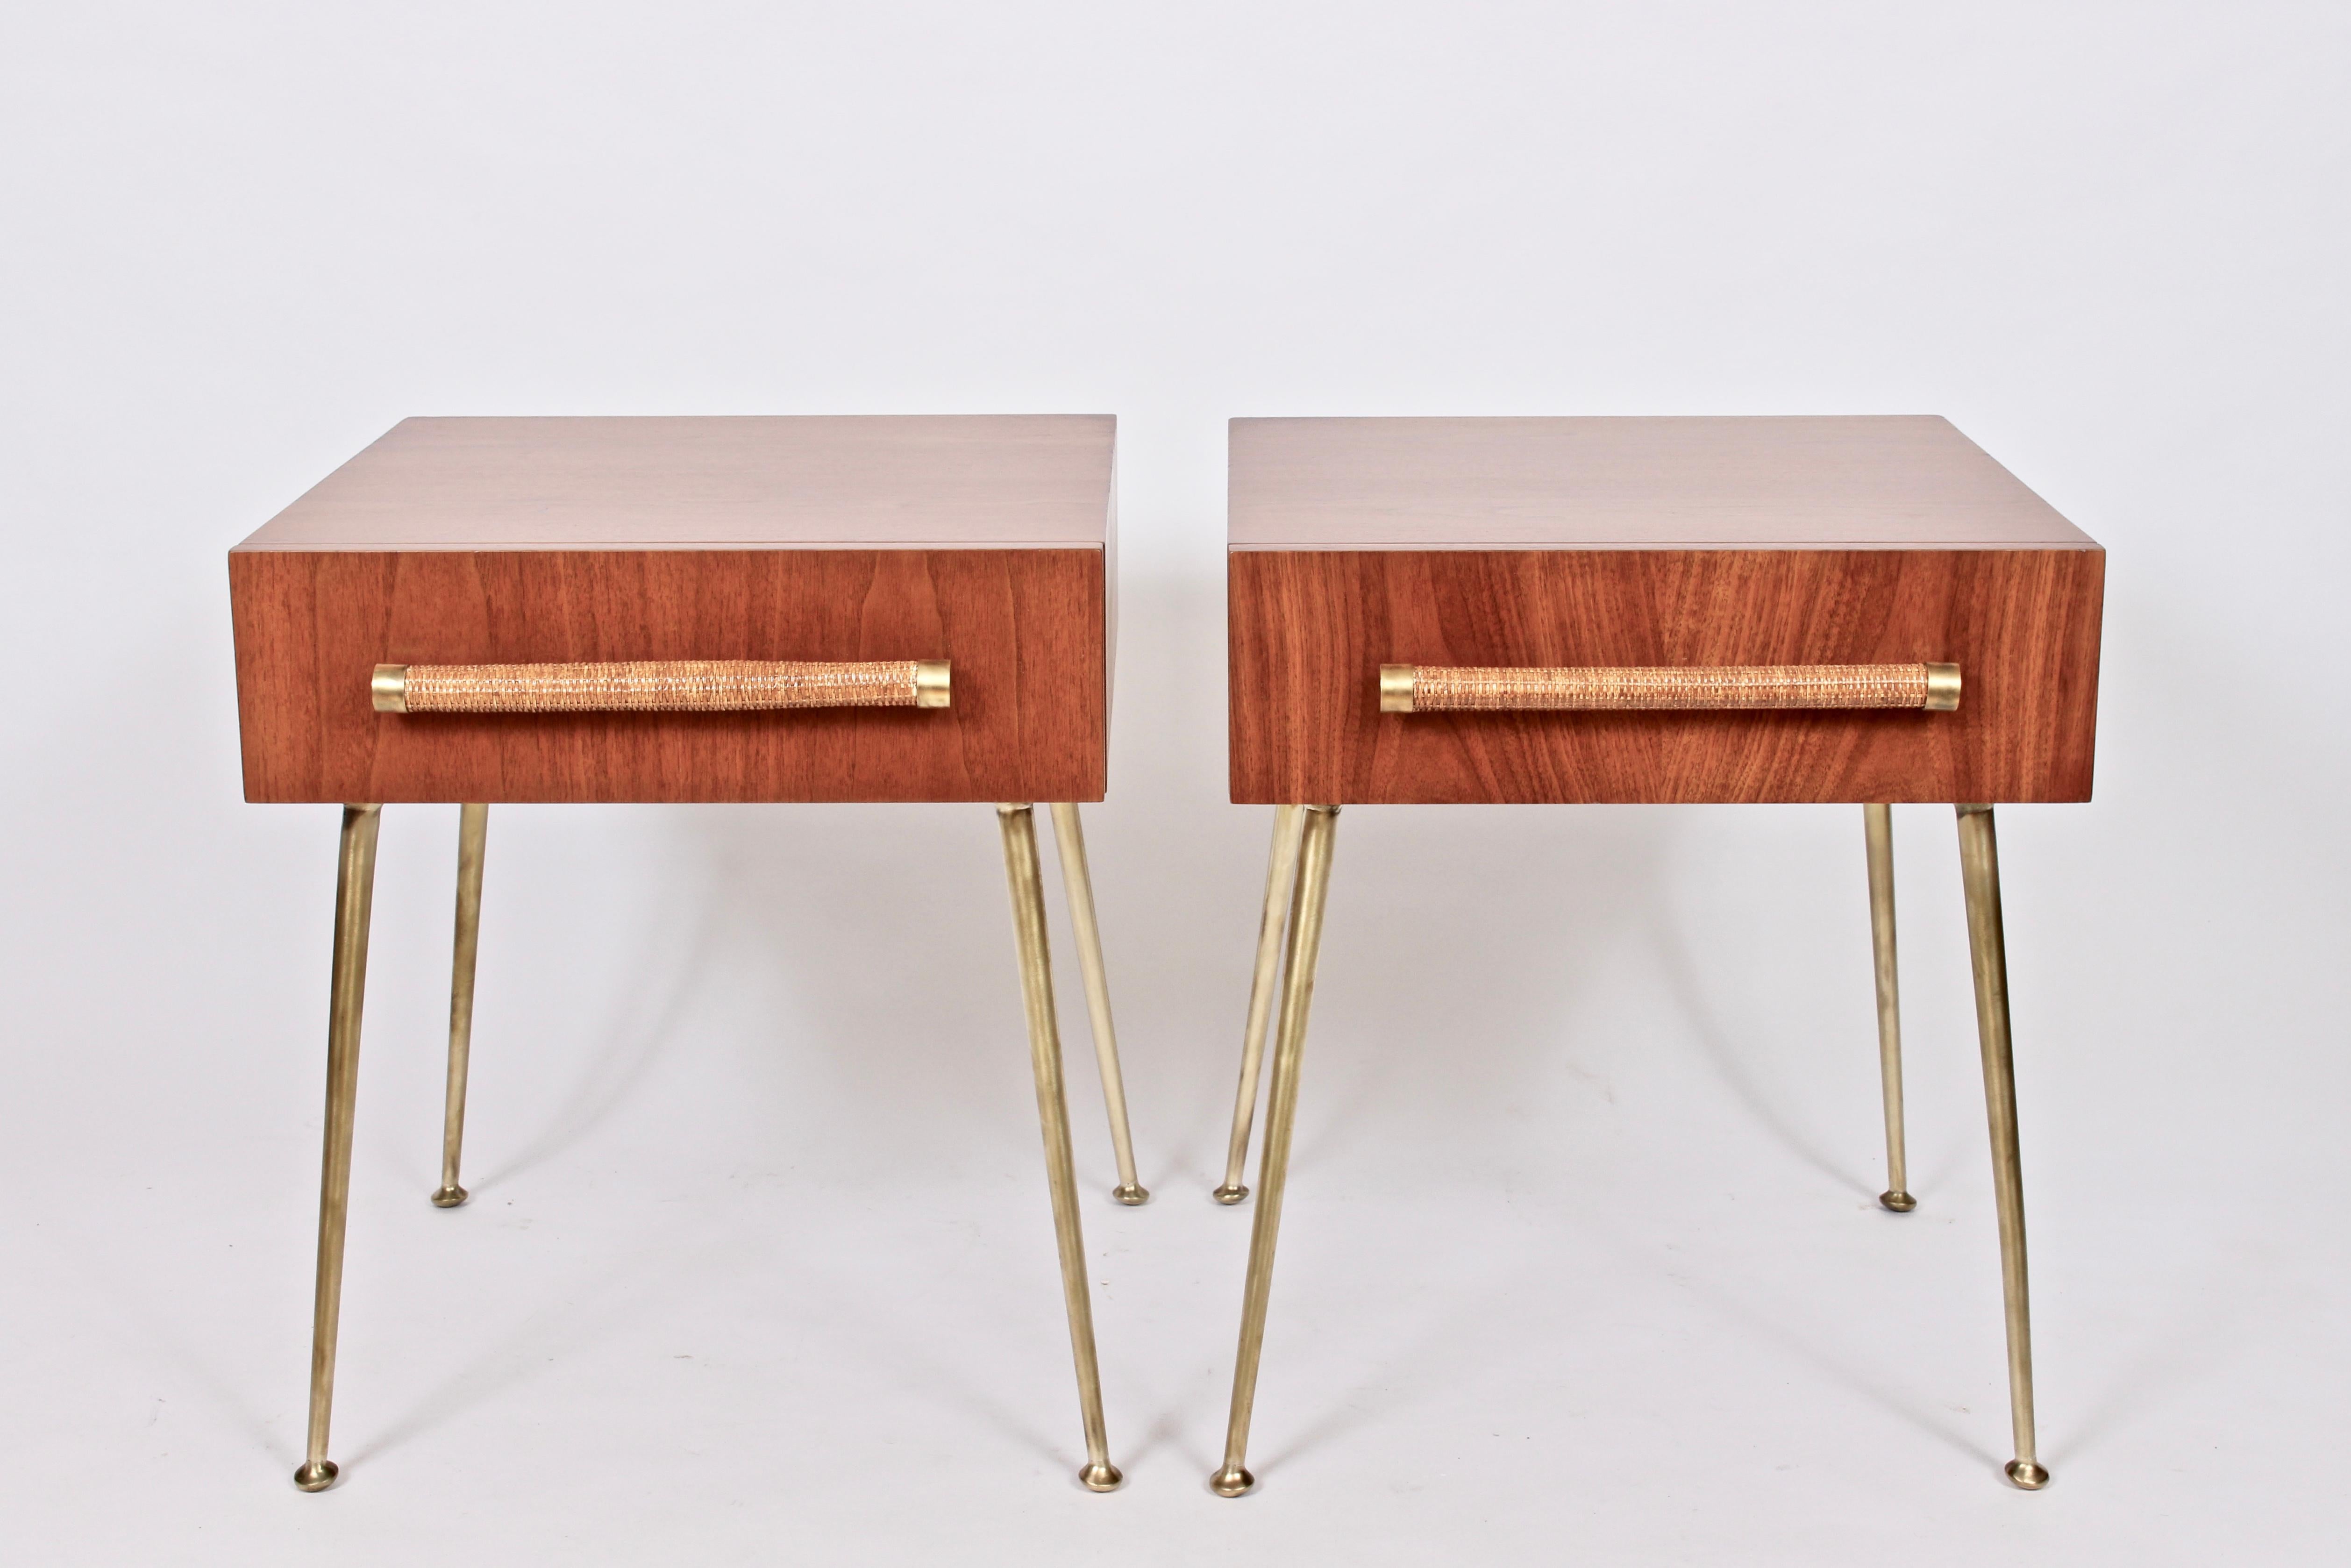 Pair of Robsjohn-Gibbings Model 4001 walnut, brass and Raffia tables, 1950s. Featuring wide drawers, splayed and capped brushed Brass legs, newly wrapped raffia handles with Brass details. Timeless. Fine design. With original fabric labels to drawer